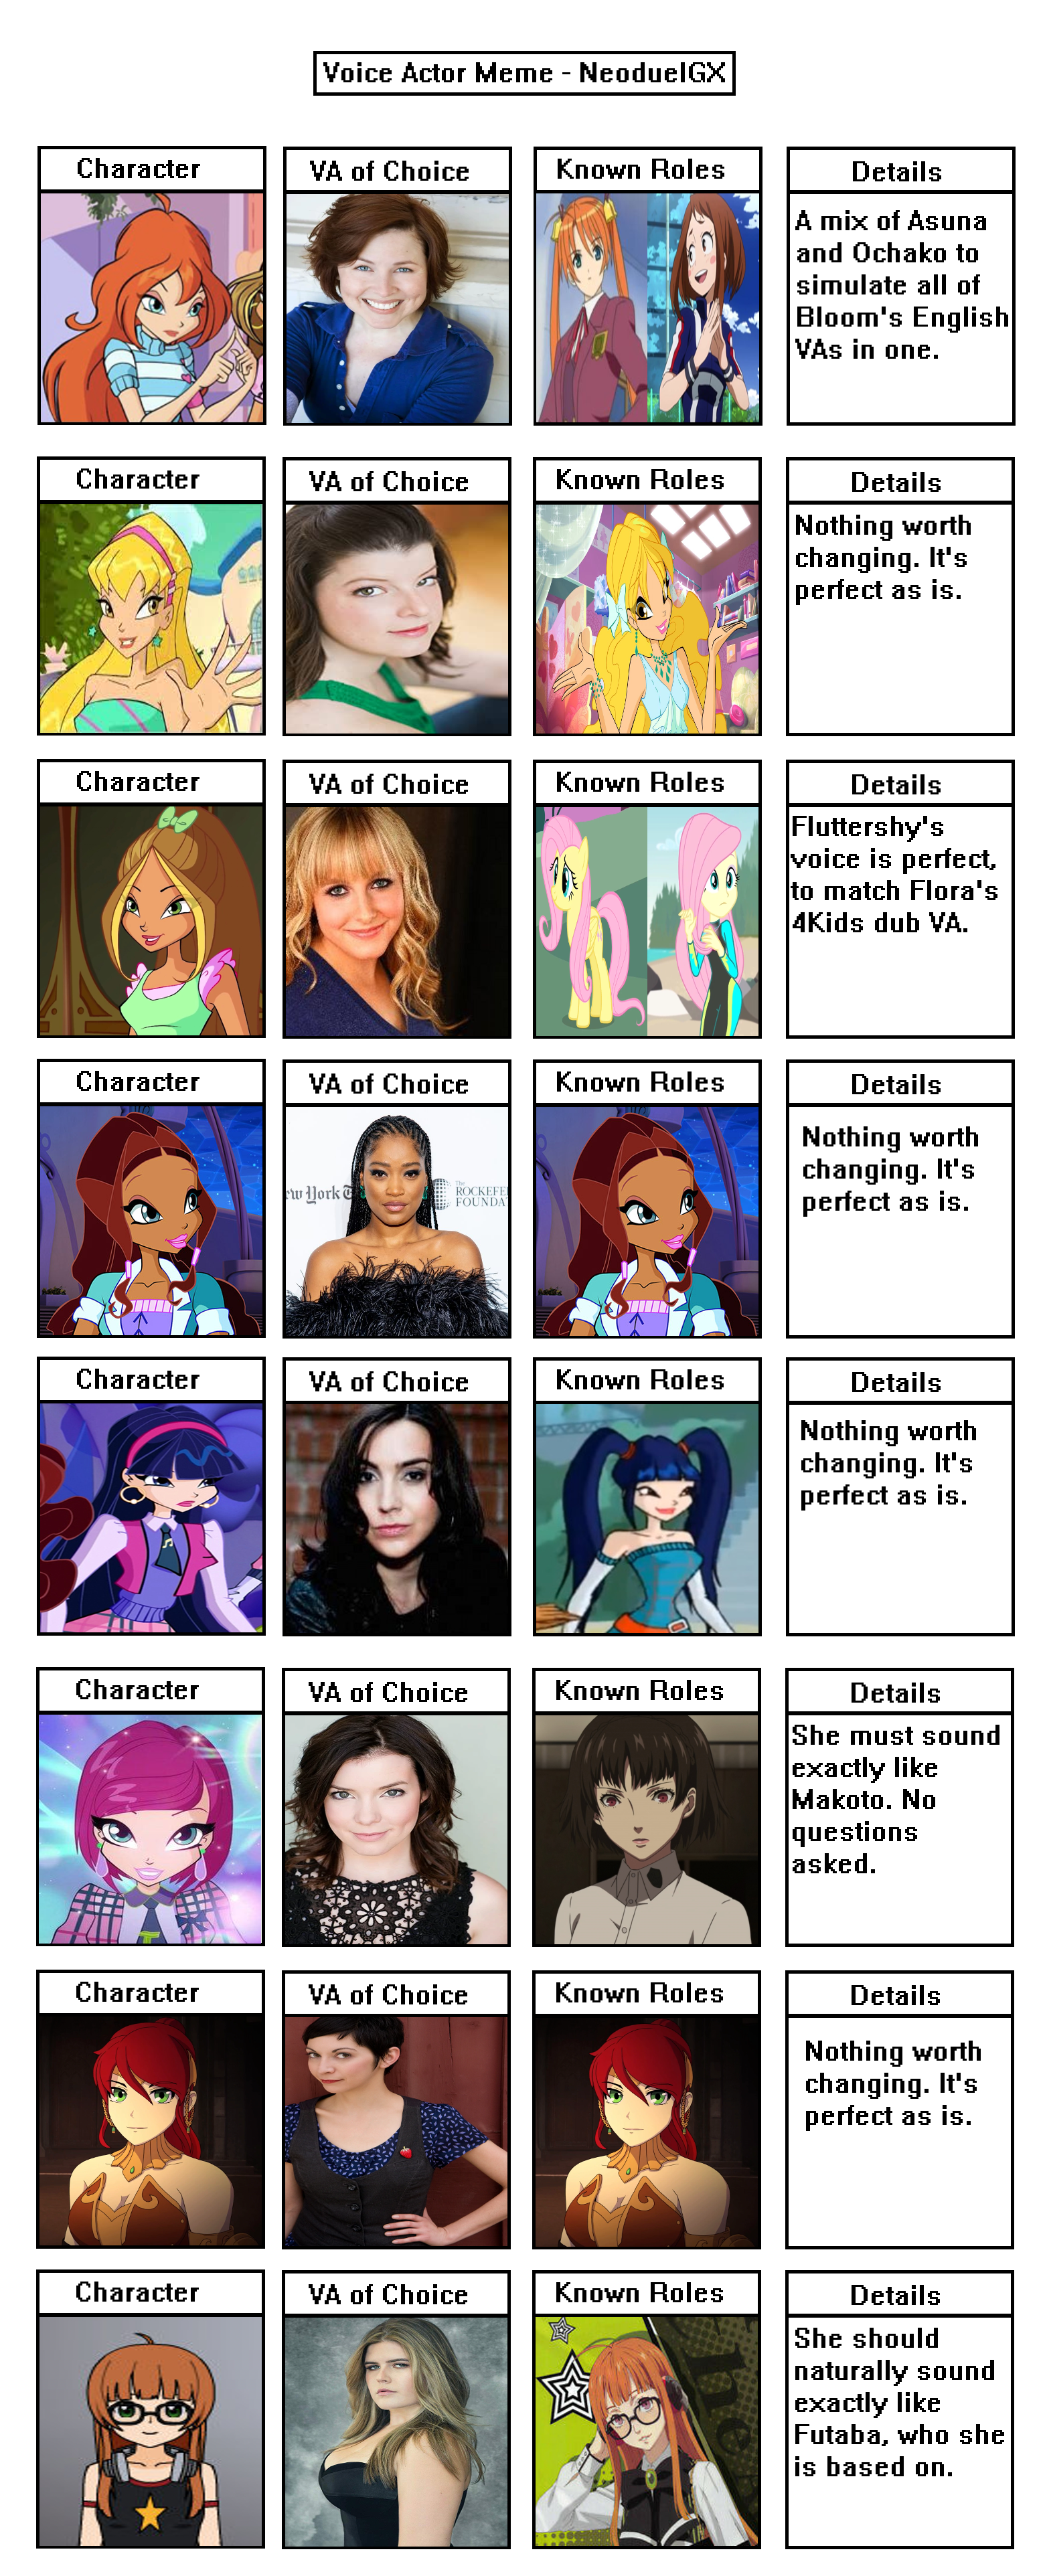 Winx Club Crossover Style Voice Cast 1 by NeoduelGX on DeviantArt